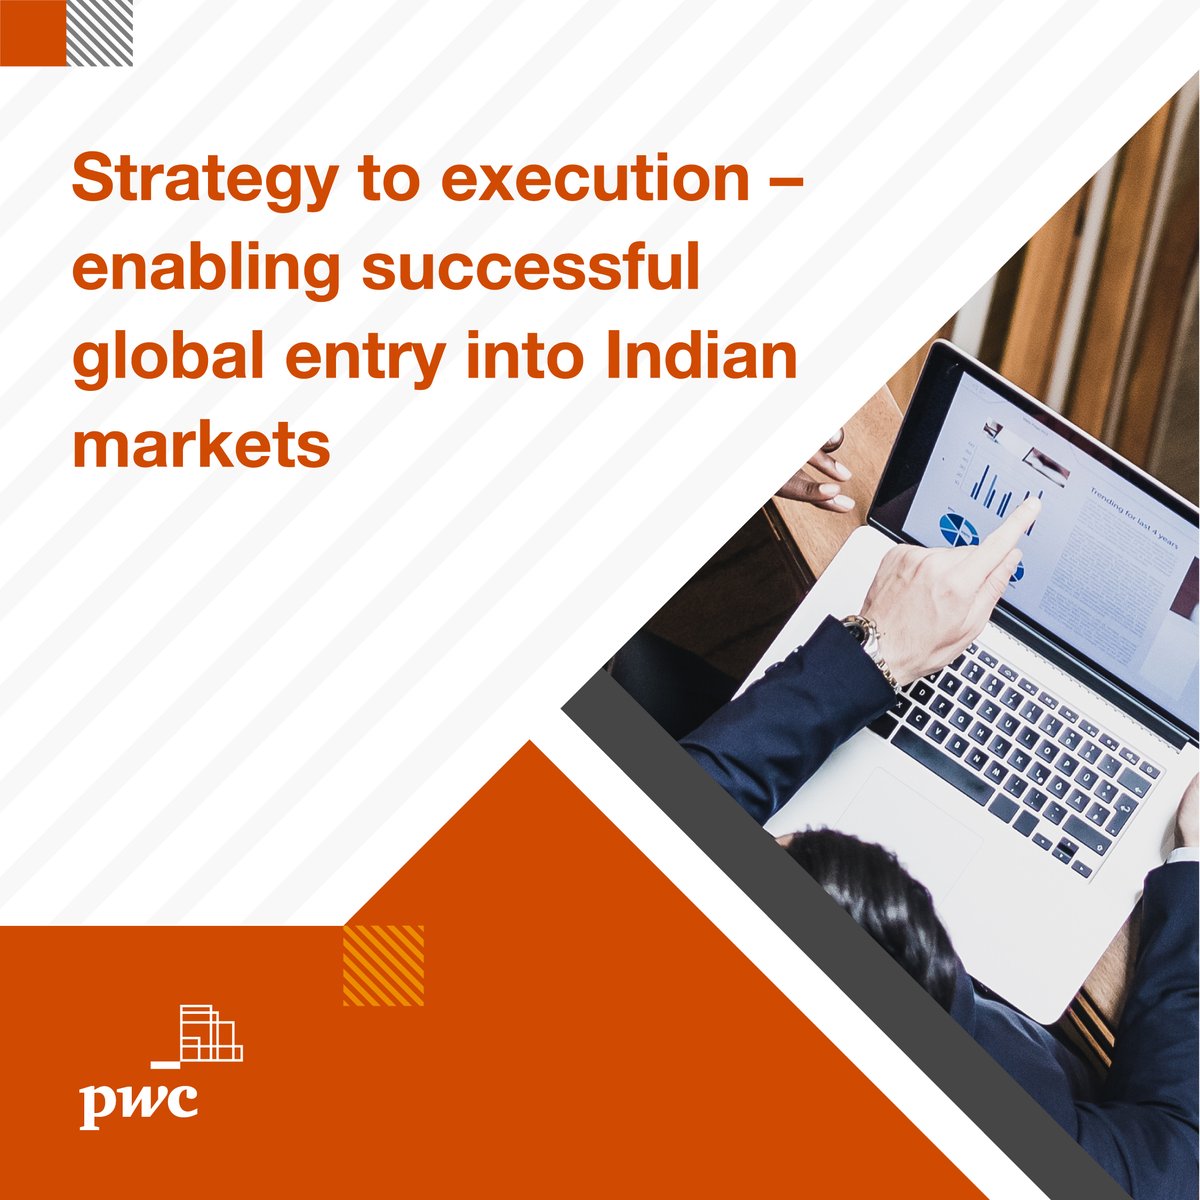 India has emerged as a hub of opportunities for global investors and has shown tremendous growth in Global Capability Centres (GCCs) in the last few years. How can we drive global success in GCC expansion through strategic solutions? Read more: pwc.in/gcc #GCC